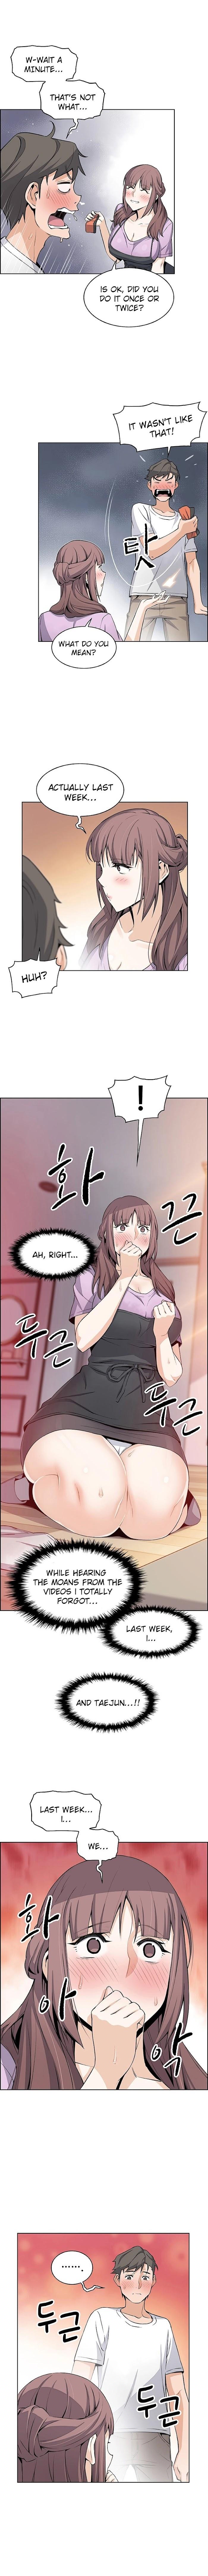 Housekeeper [Neck Pillow, Paper] Ch.49/49 [English] [Manhwa PDF] Completed 210